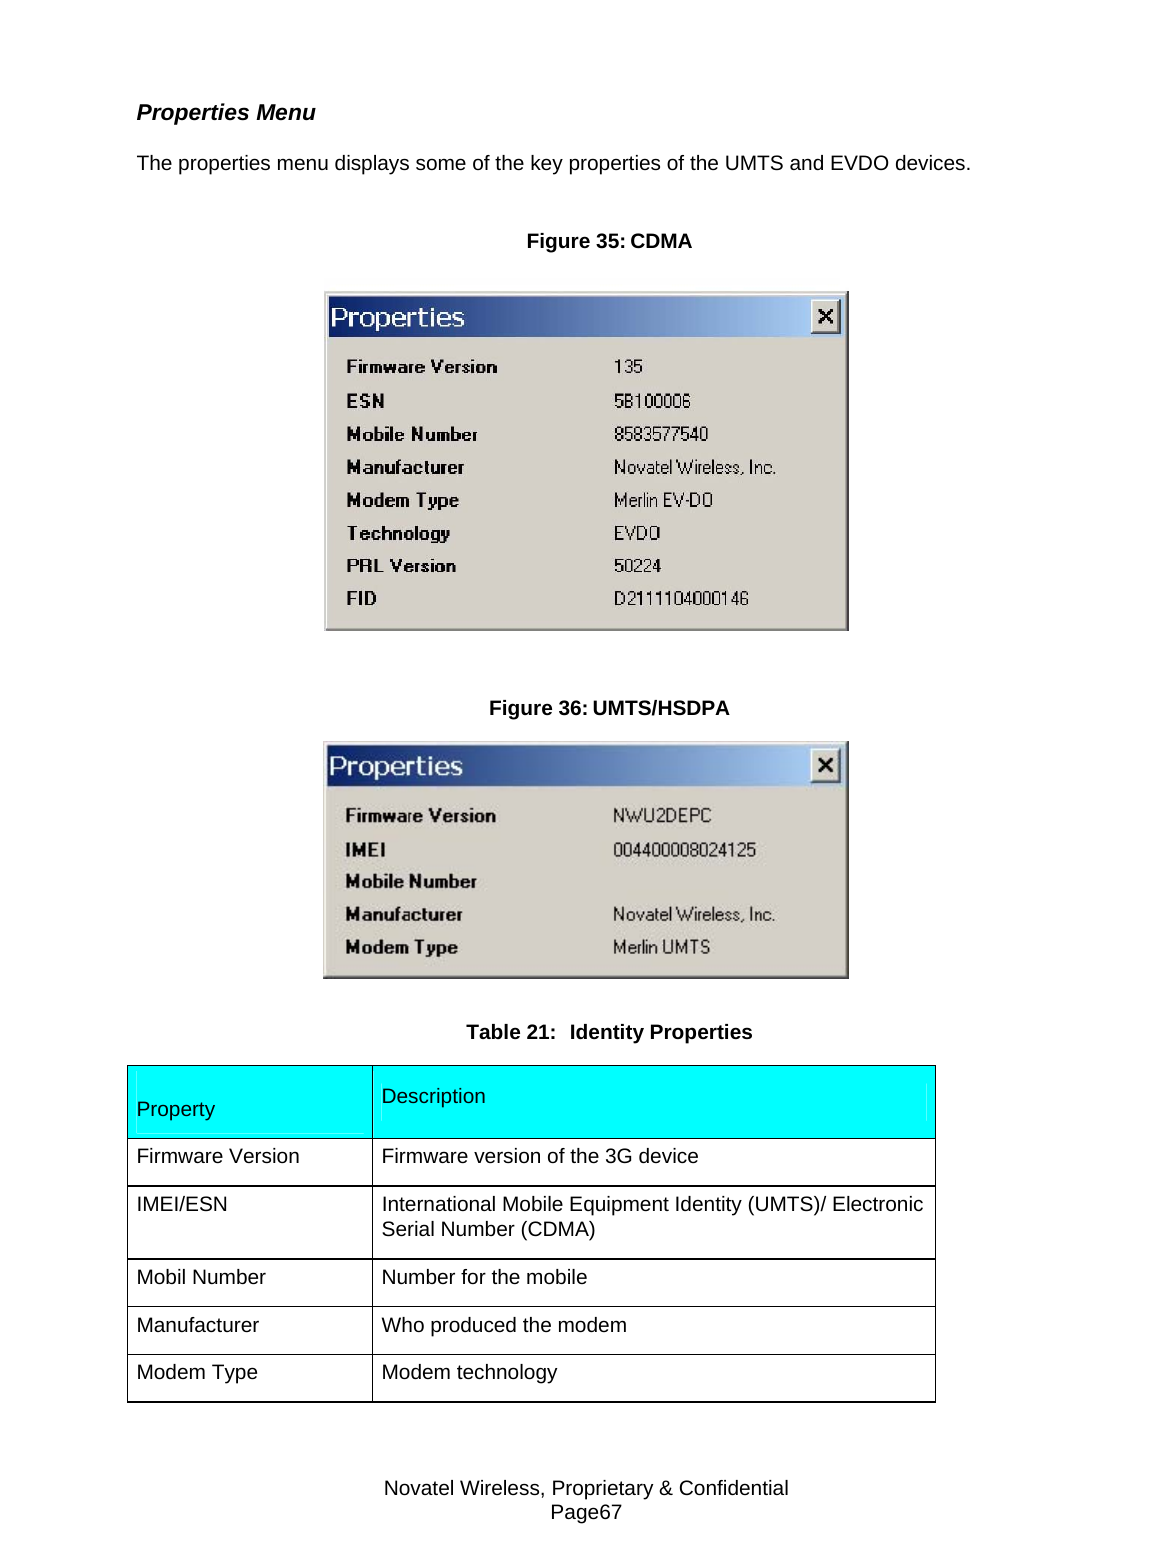 Novatel Wireless, Proprietary &amp; Confidential Page67 Properties Menu  The properties menu displays some of the key properties of the UMTS and EVDO devices.  Figure 35: CDMA   Figure 36: UMTS/HSDPA  Table 21:  Identity Properties  Property   Description  Firmware Version   Firmware version of the 3G device  IMEI/ESN   International Mobile Equipment Identity (UMTS)/ Electronic Serial Number (CDMA)  Mobil Number   Number for the mobile  Manufacturer   Who produced the modem  Modem Type   Modem technology  